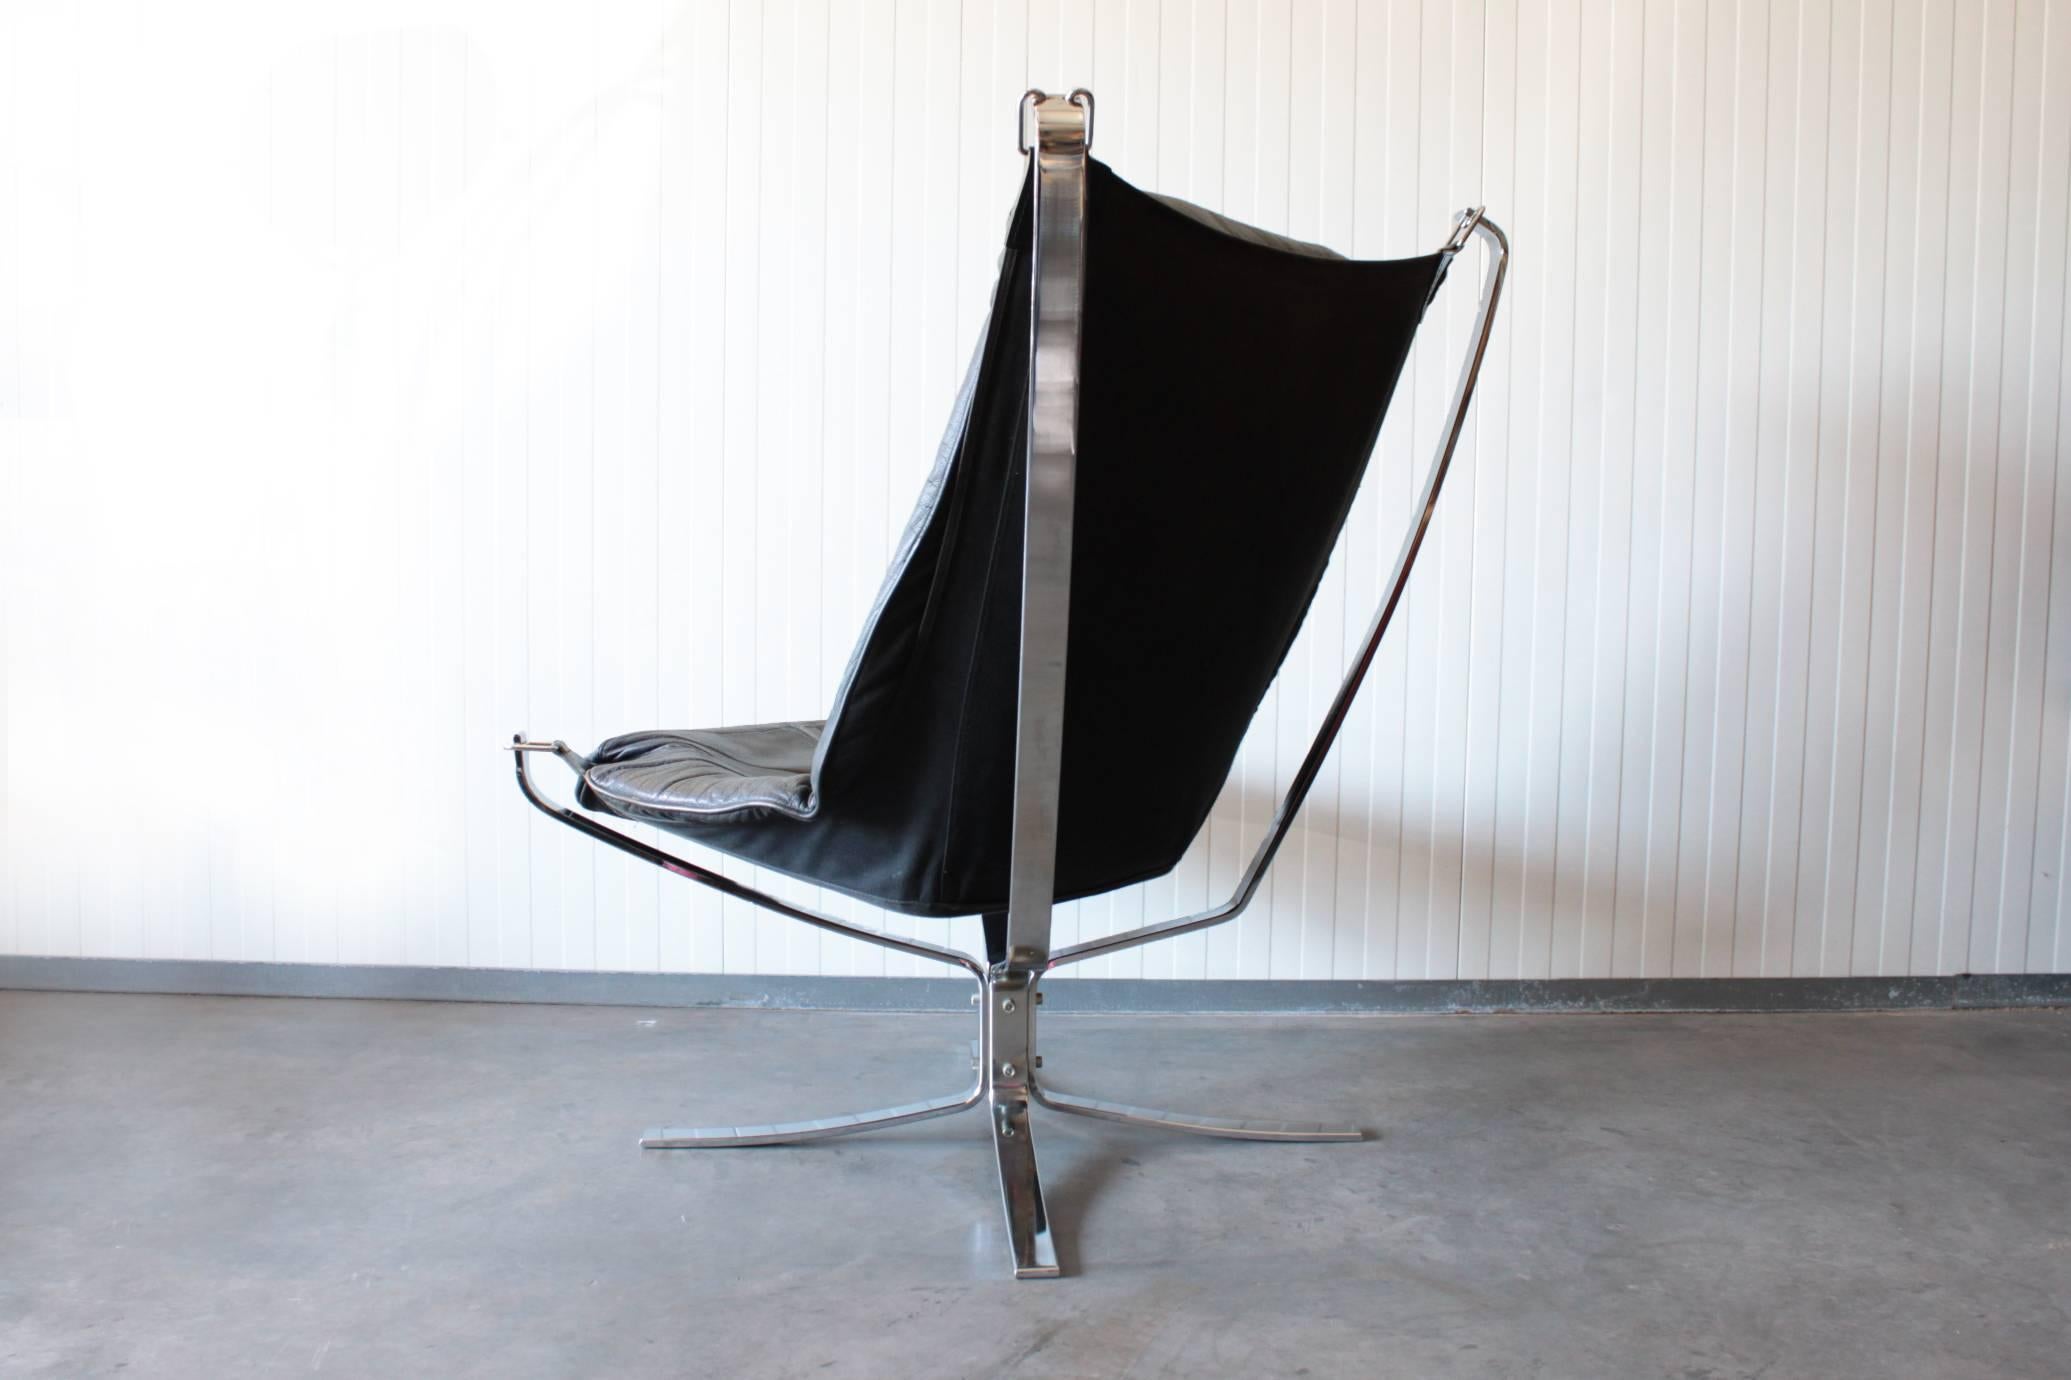 This lounge chair was designed by Sigurd Resell for Vatne Møbler in Norway during the 1970s. The chair features a chrome-plated steel foot and frame with a canvas under layer and leather cushion seating. The item is in good vintage condition with